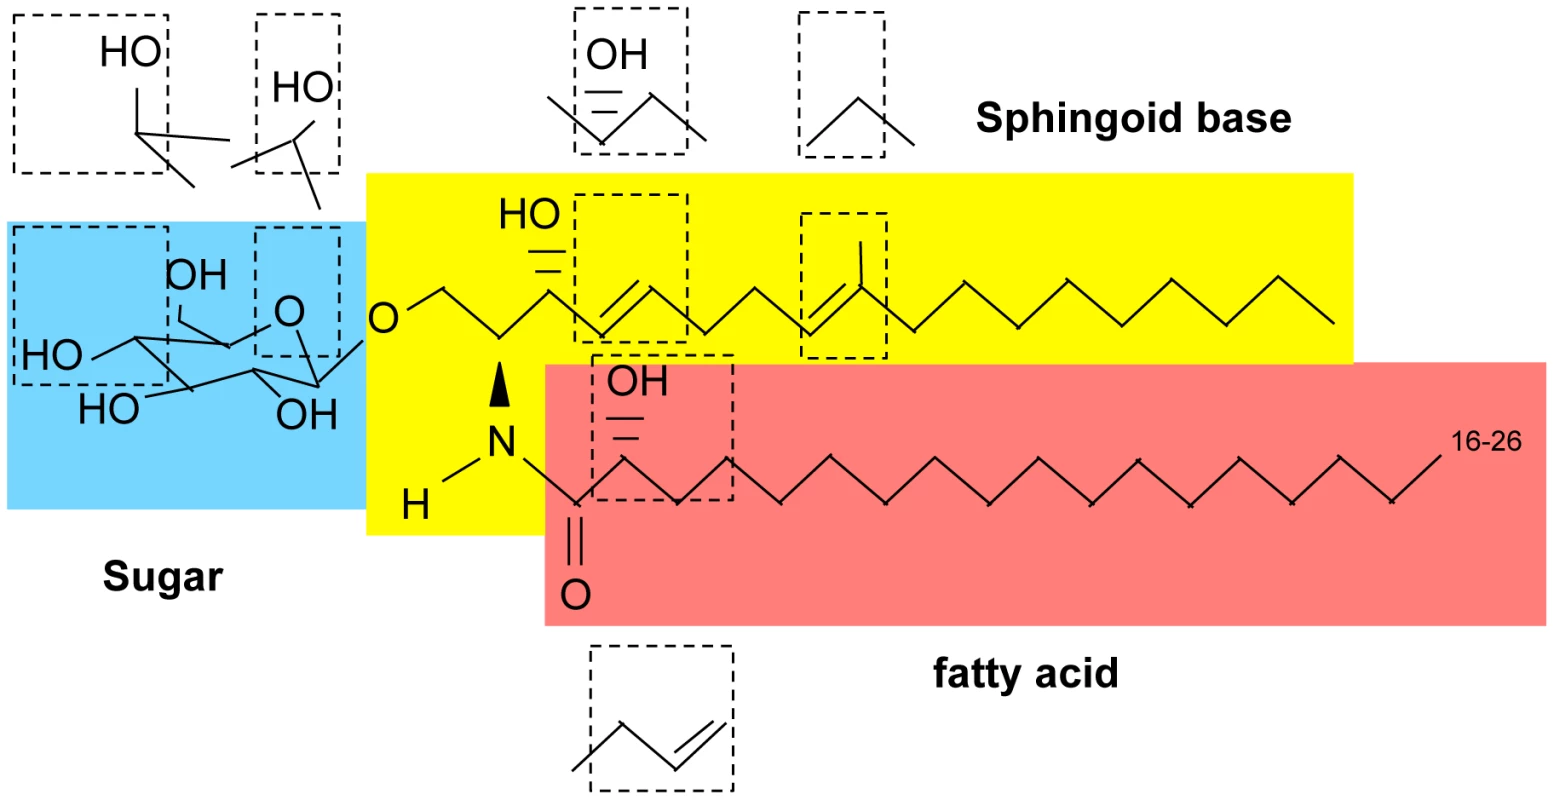 Basic structure of glycosphingolipids.